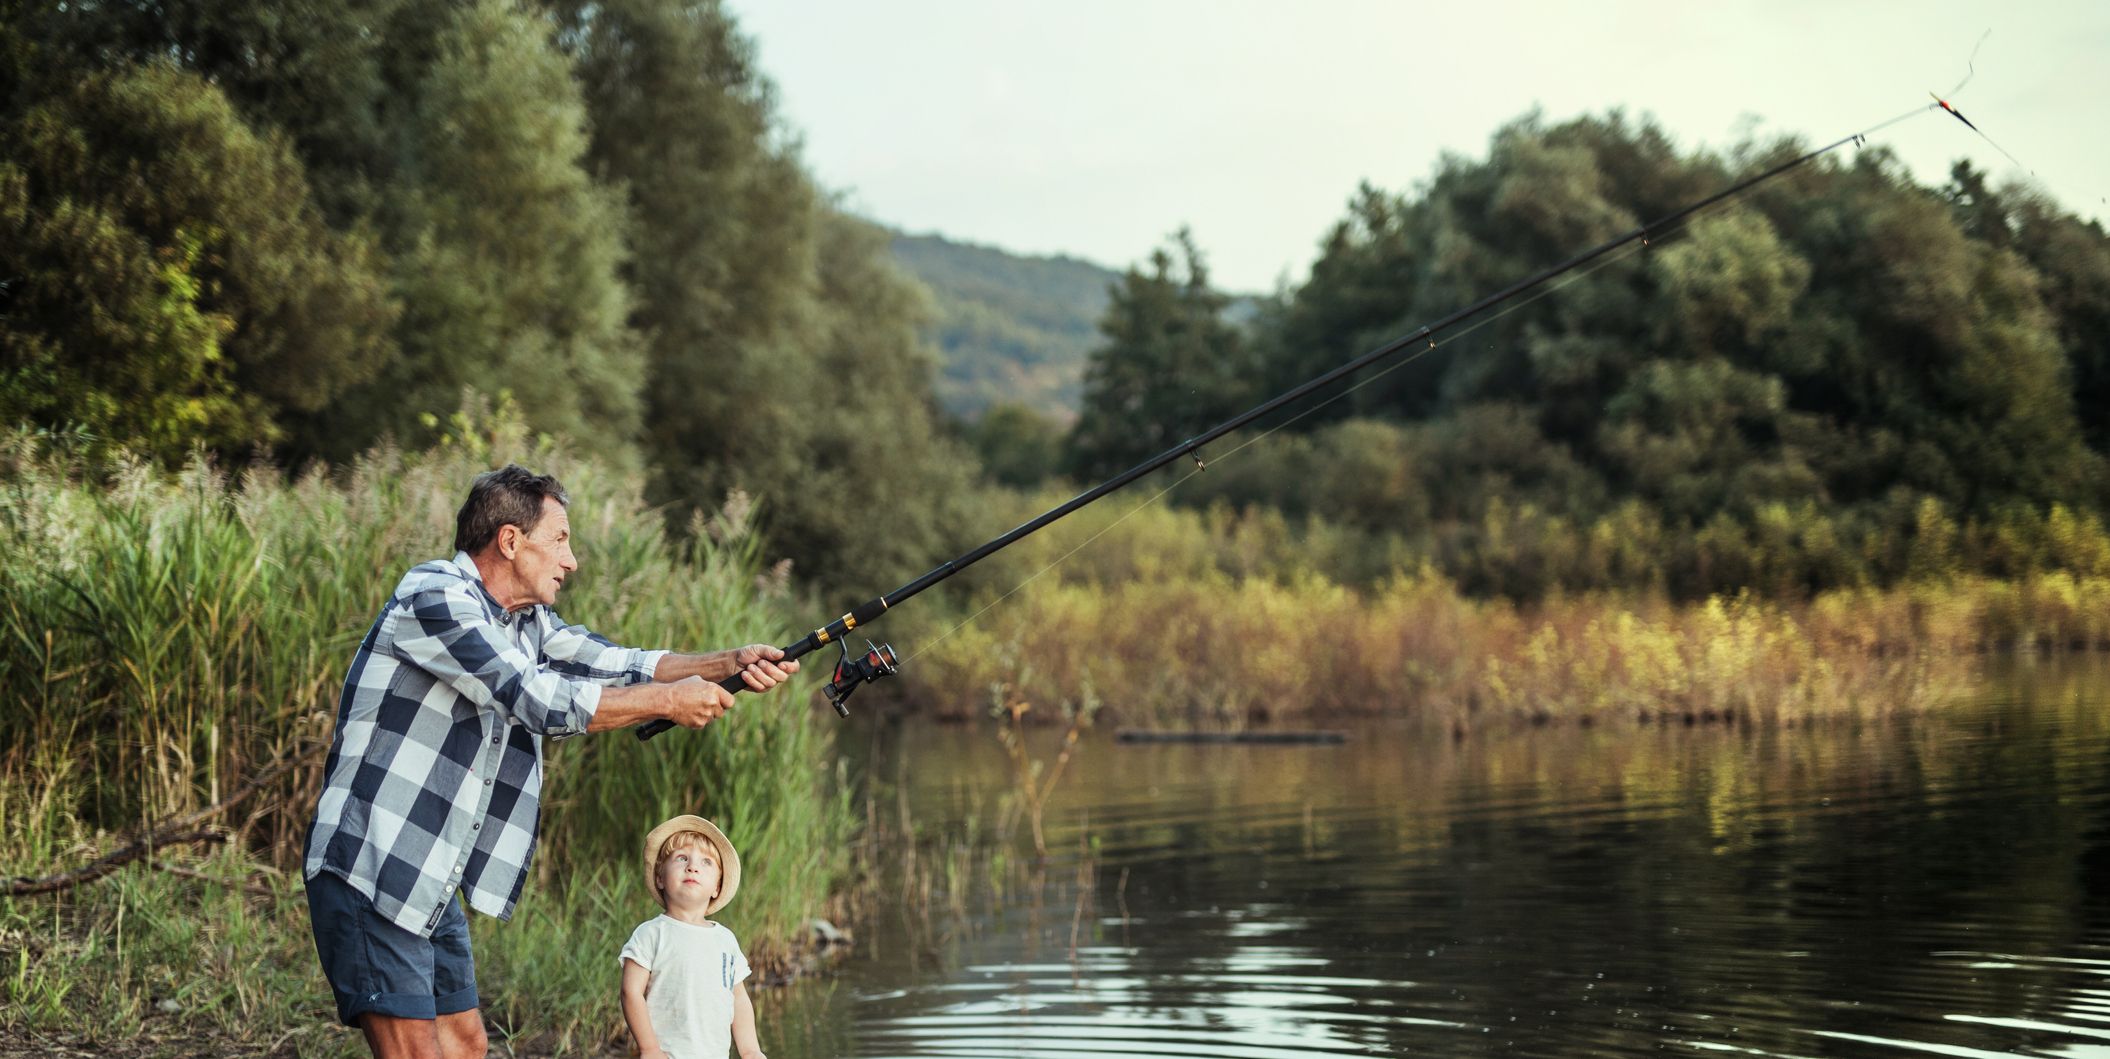 for　Presents　32　Dad　for　Fishing　Gifts　Anglers